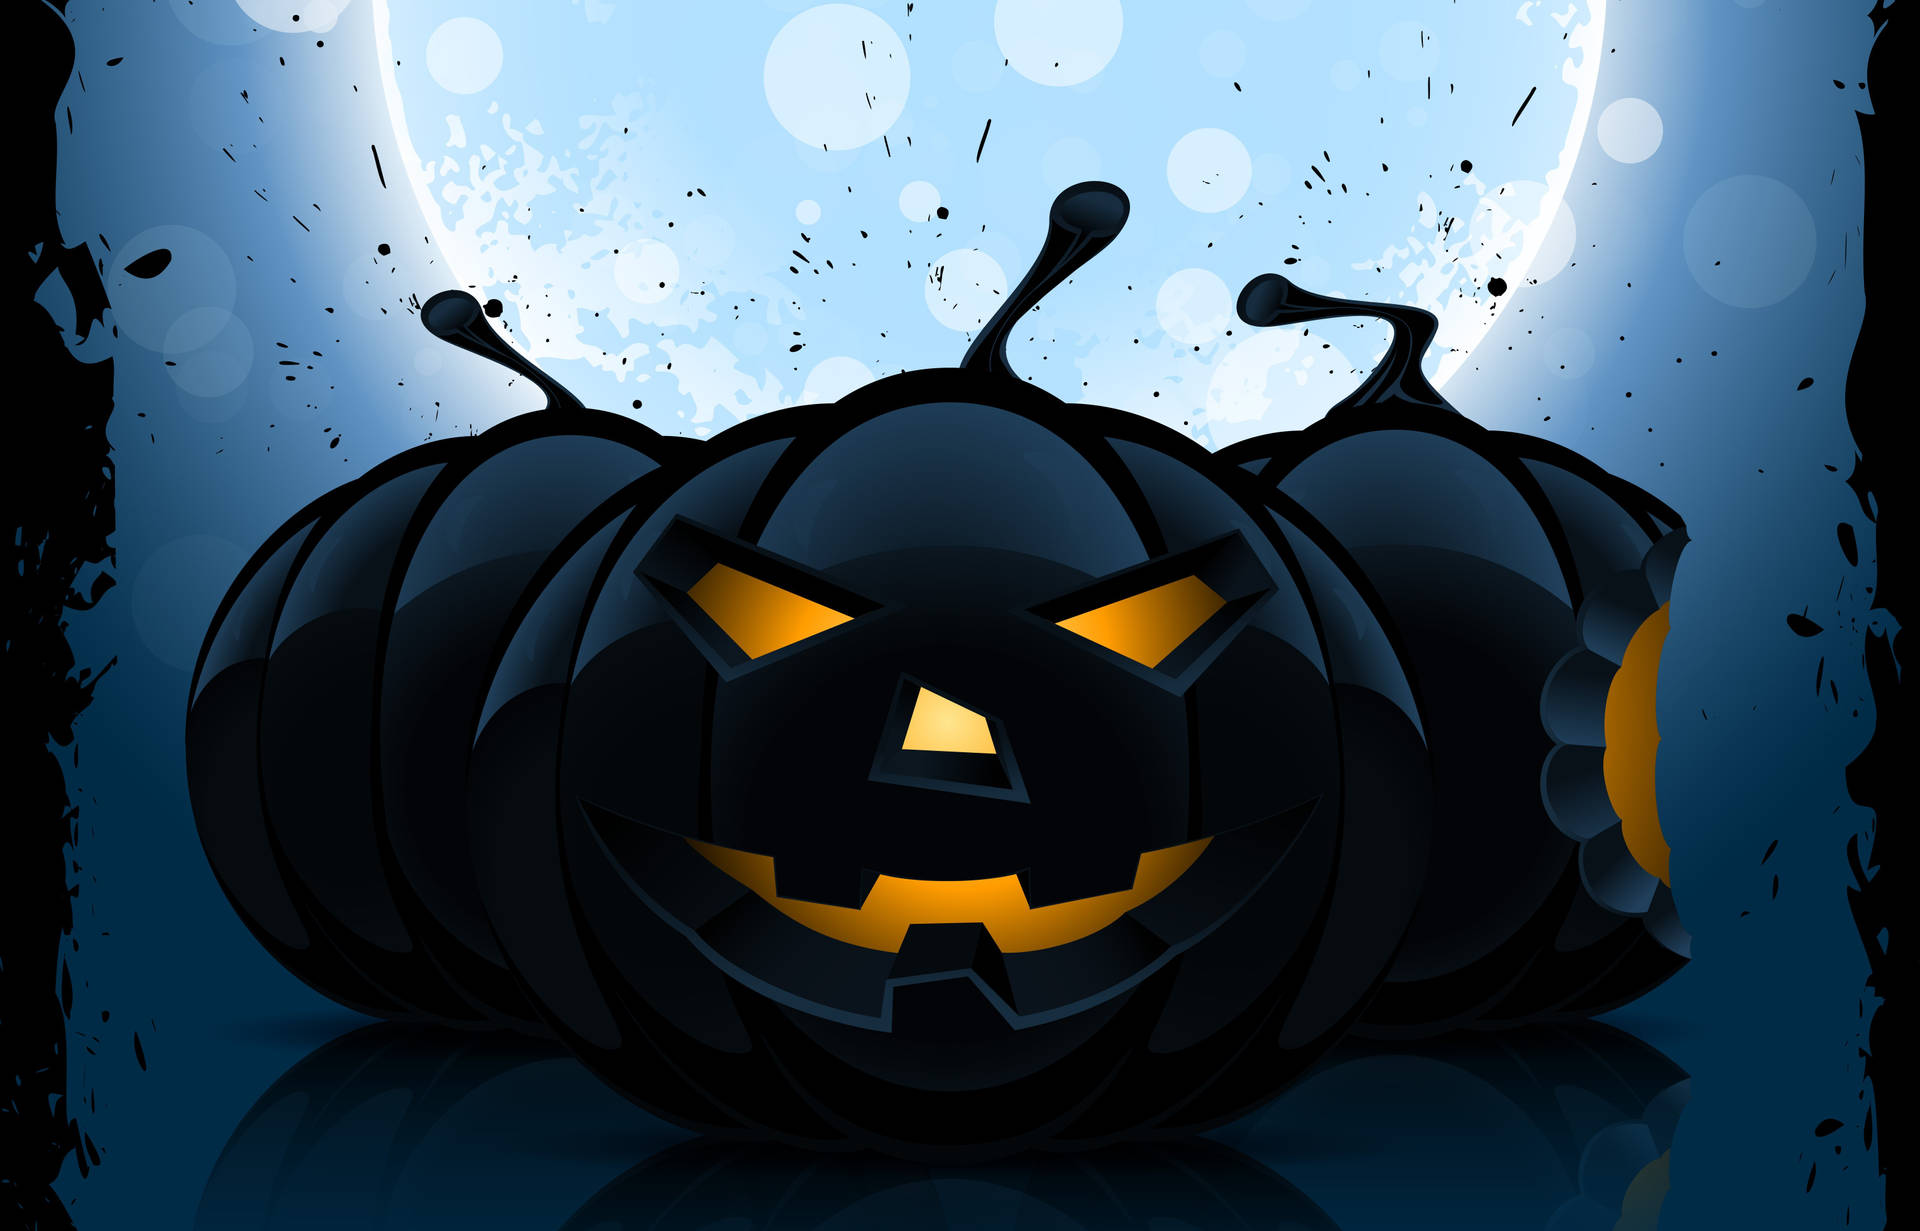 Celebrate a Spooktacular Halloween with this glowing Black Pumpkin Wallpaper